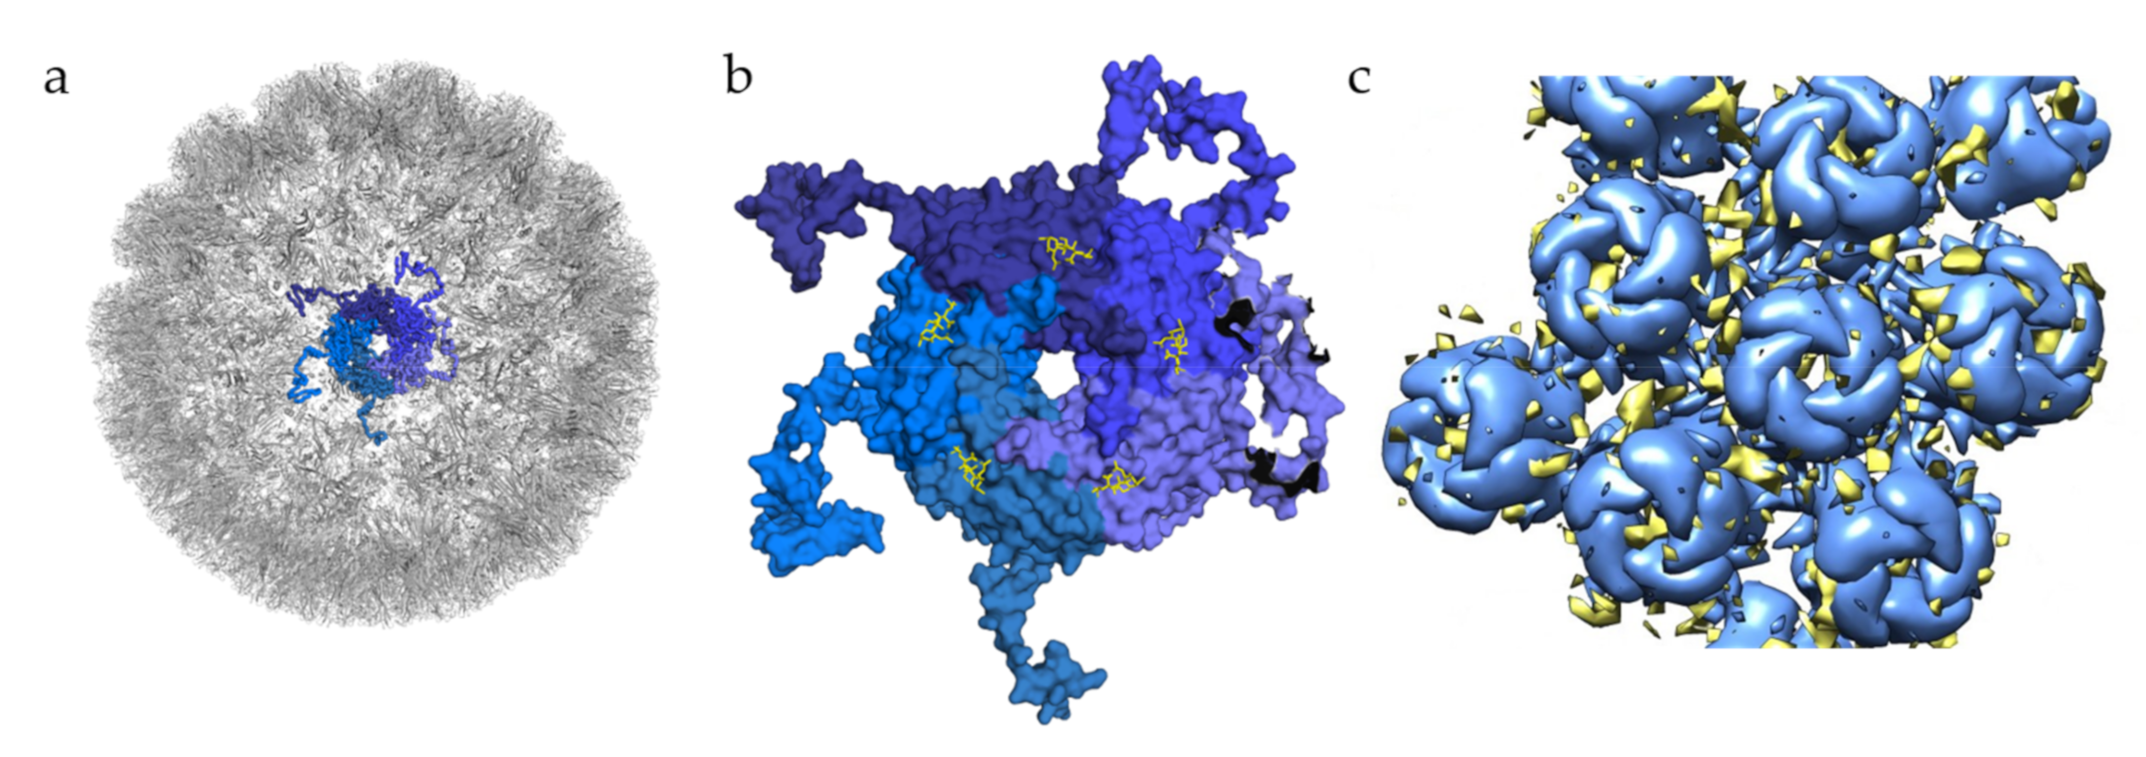 Viruses | Free Full-Text | Structural Insight into Non-Enveloped Virus  Binding to Glycosaminoglycan Receptors: A Review